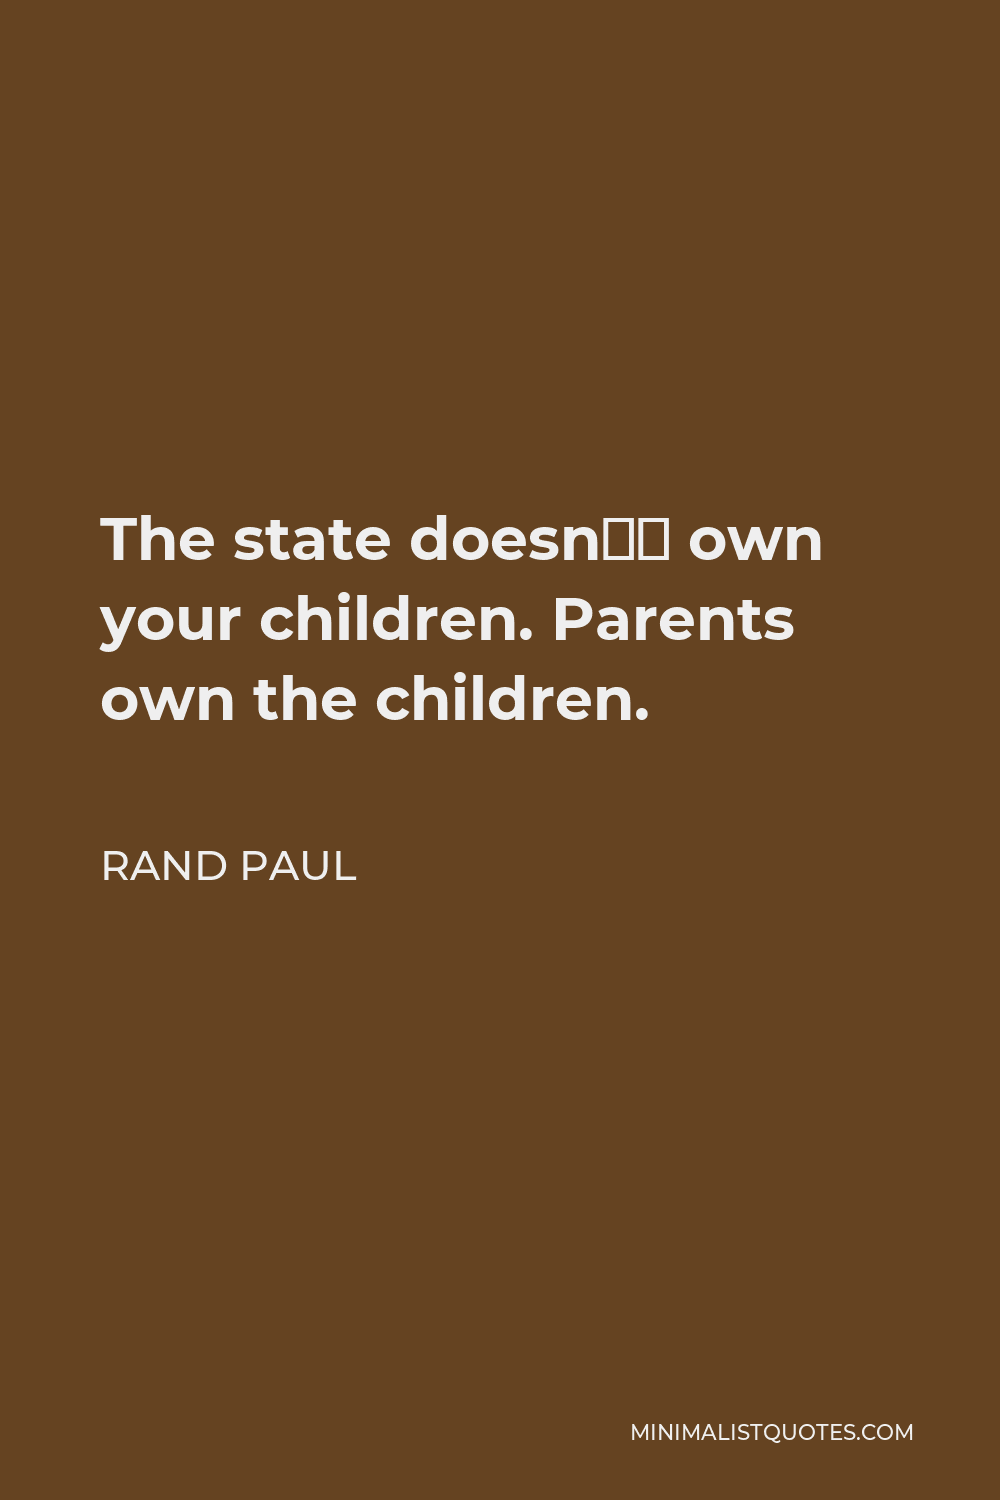 Rand Paul Quote - The state doesn’t own your children. Parents own the children.